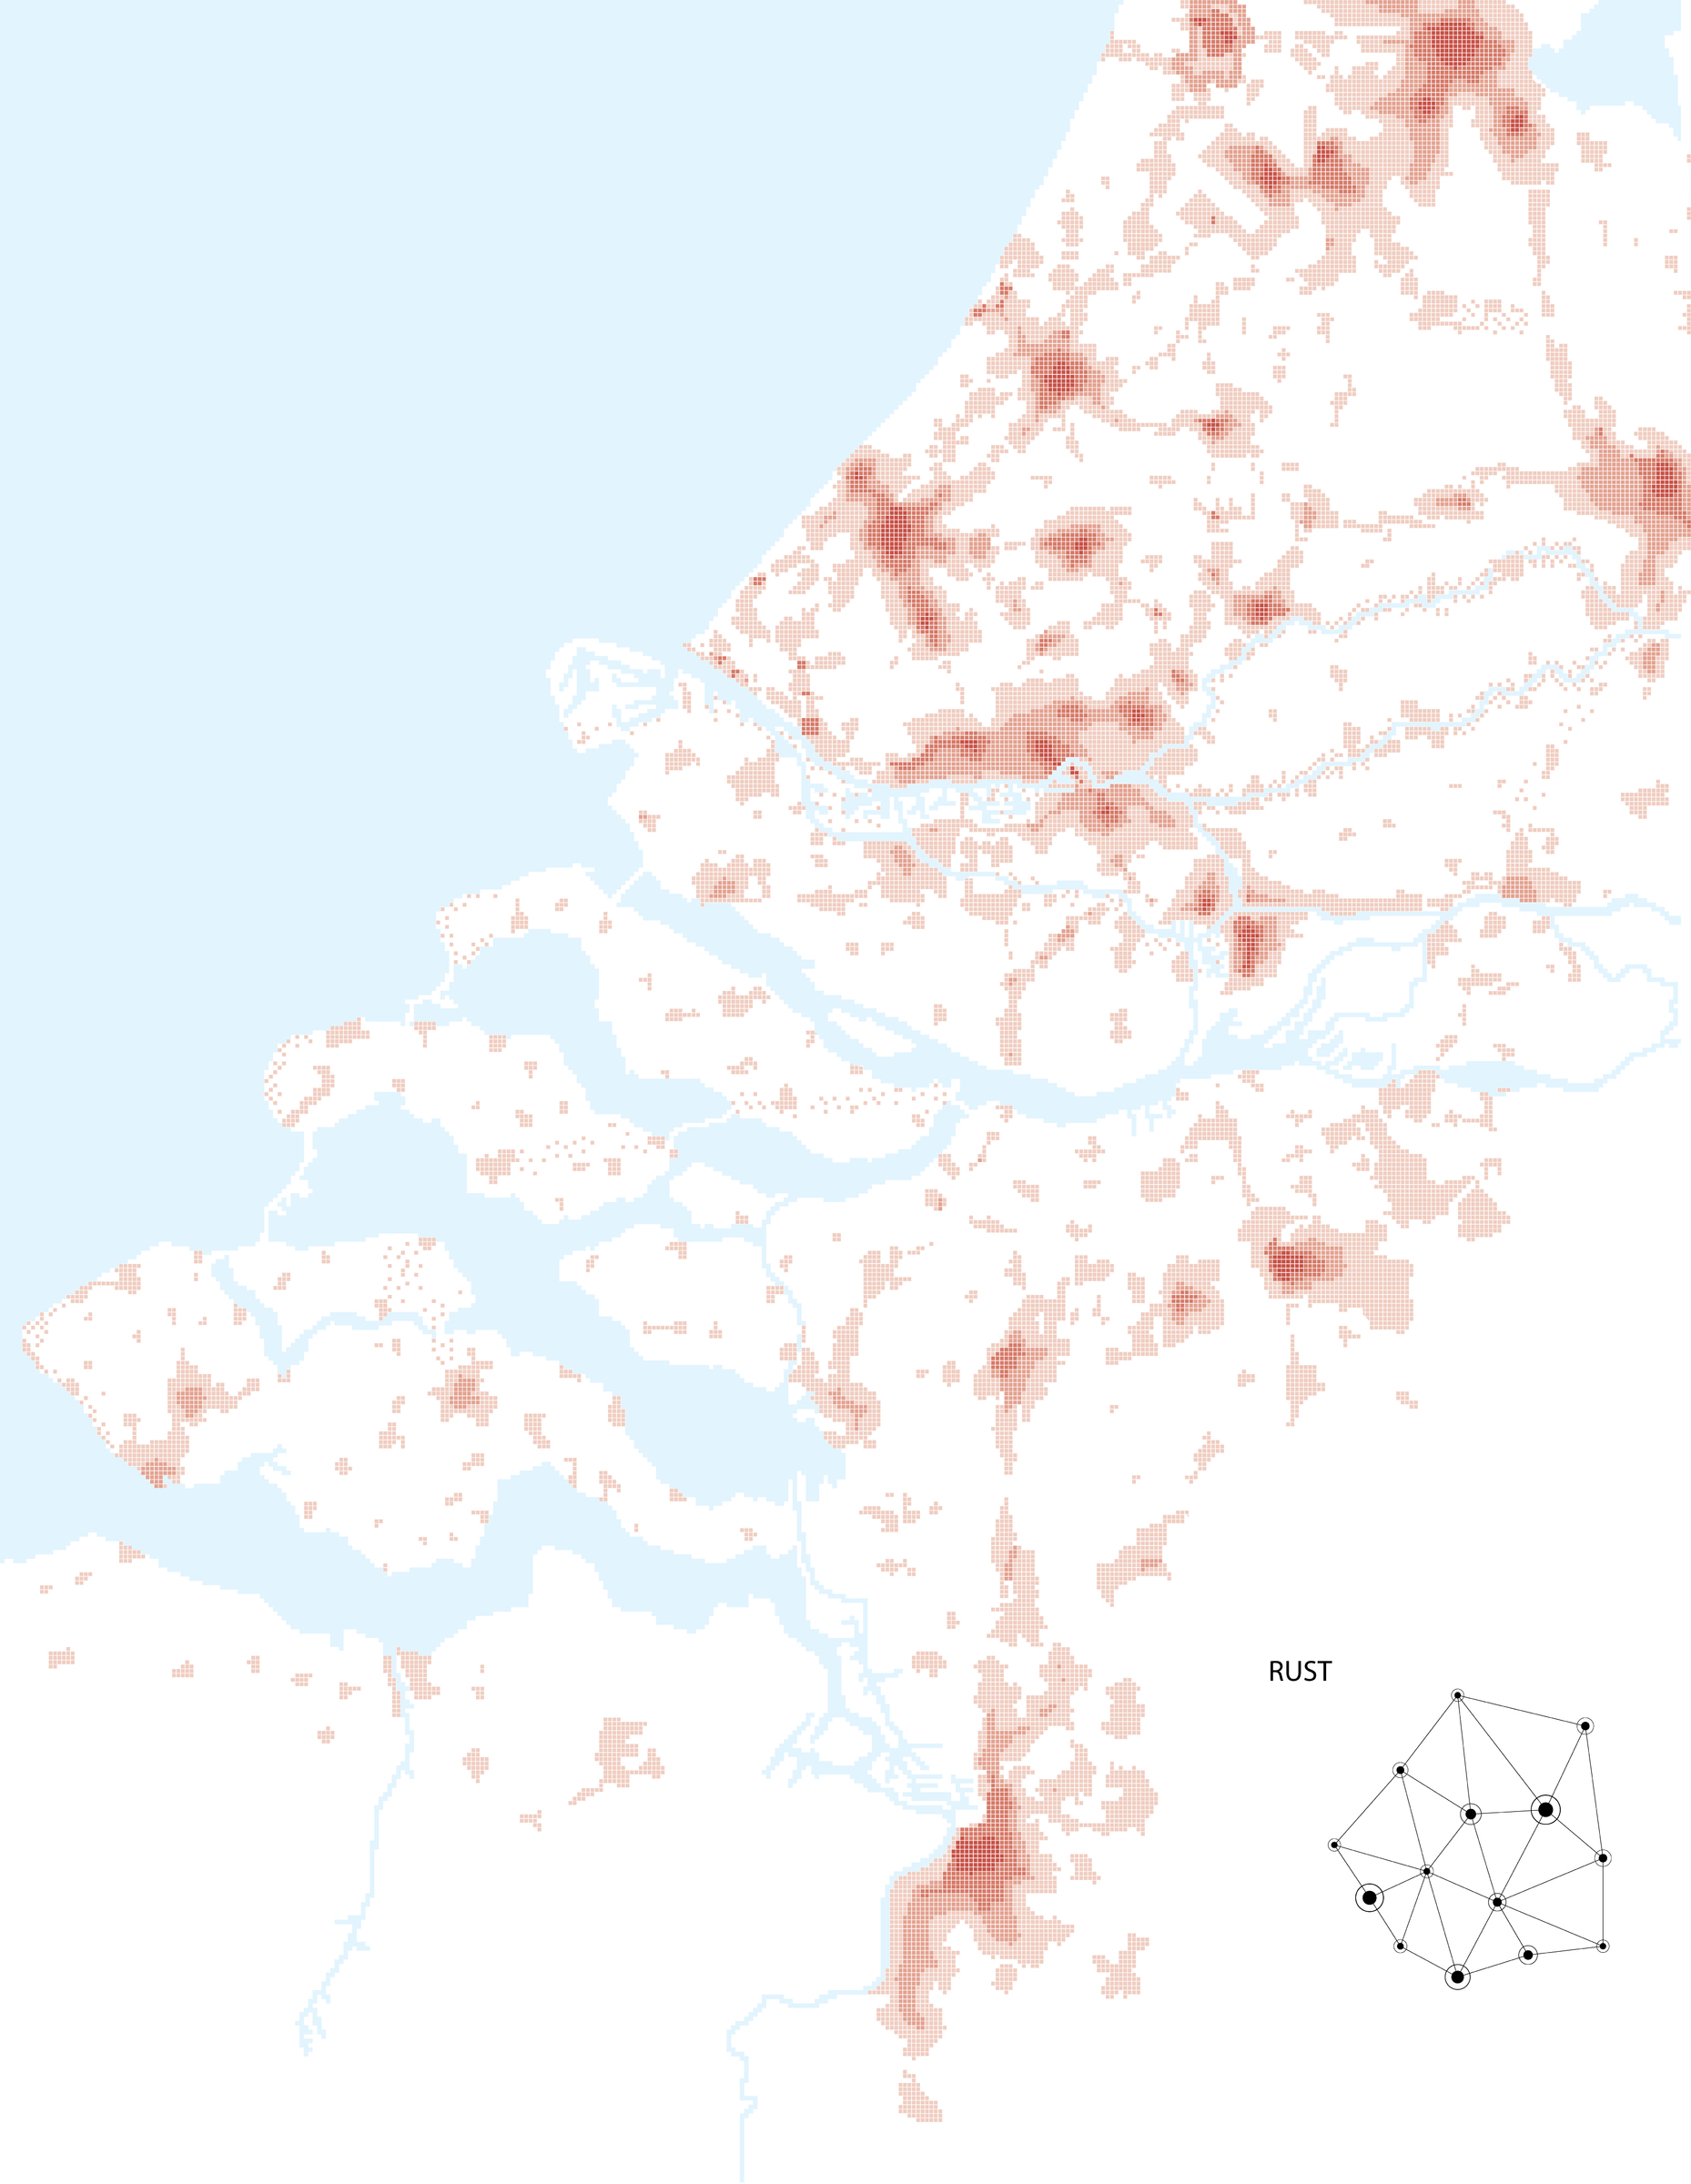 Calm: A network of small, compact urban cores